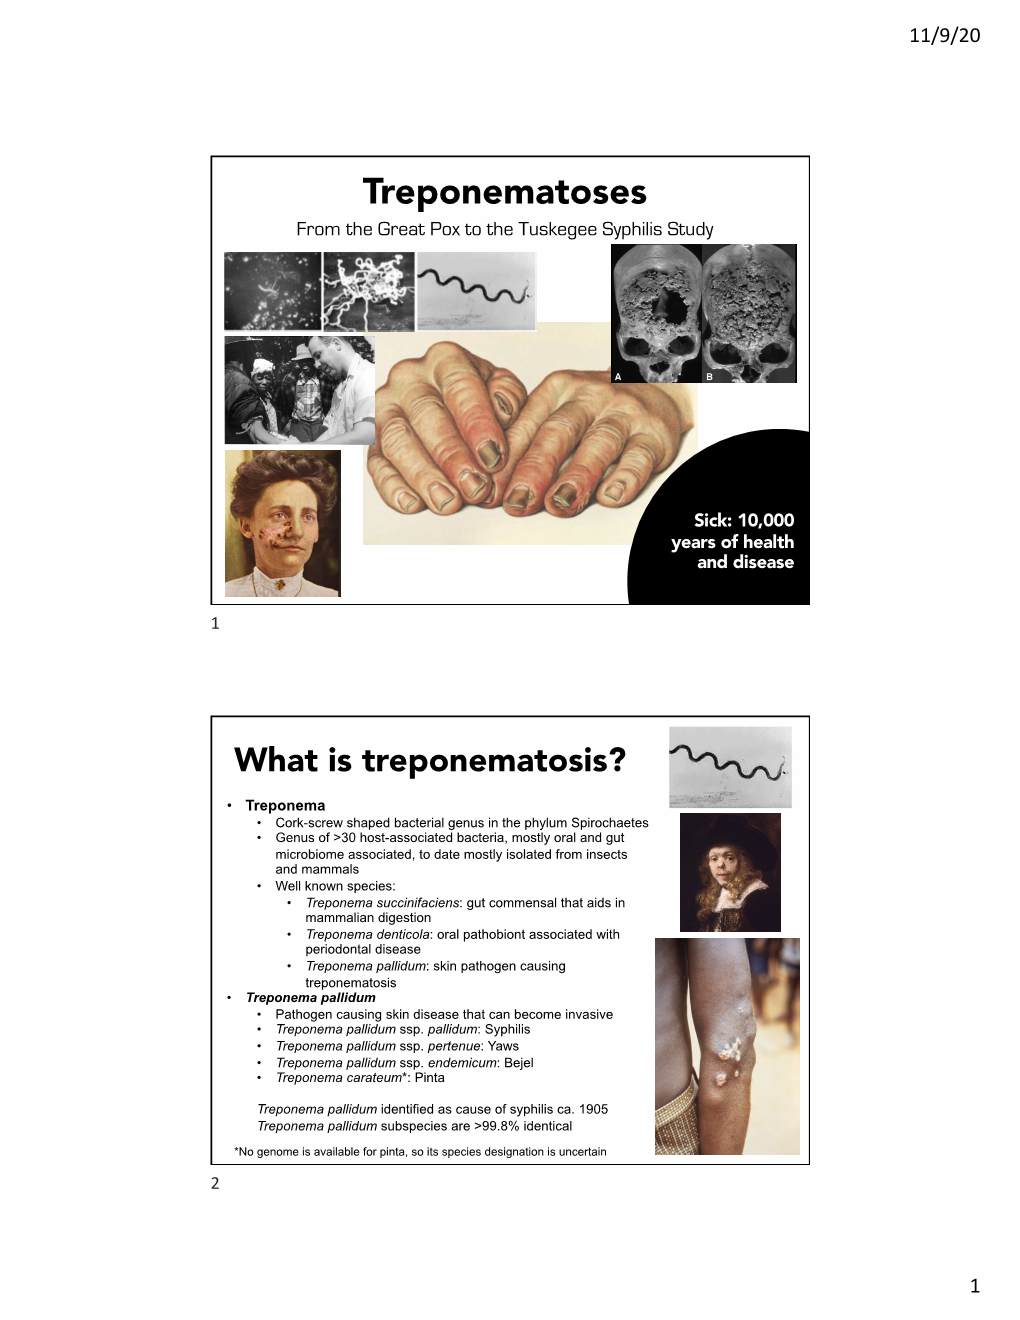 Treponematoses from the Great Pox to the Tuskegee Syphilis Study